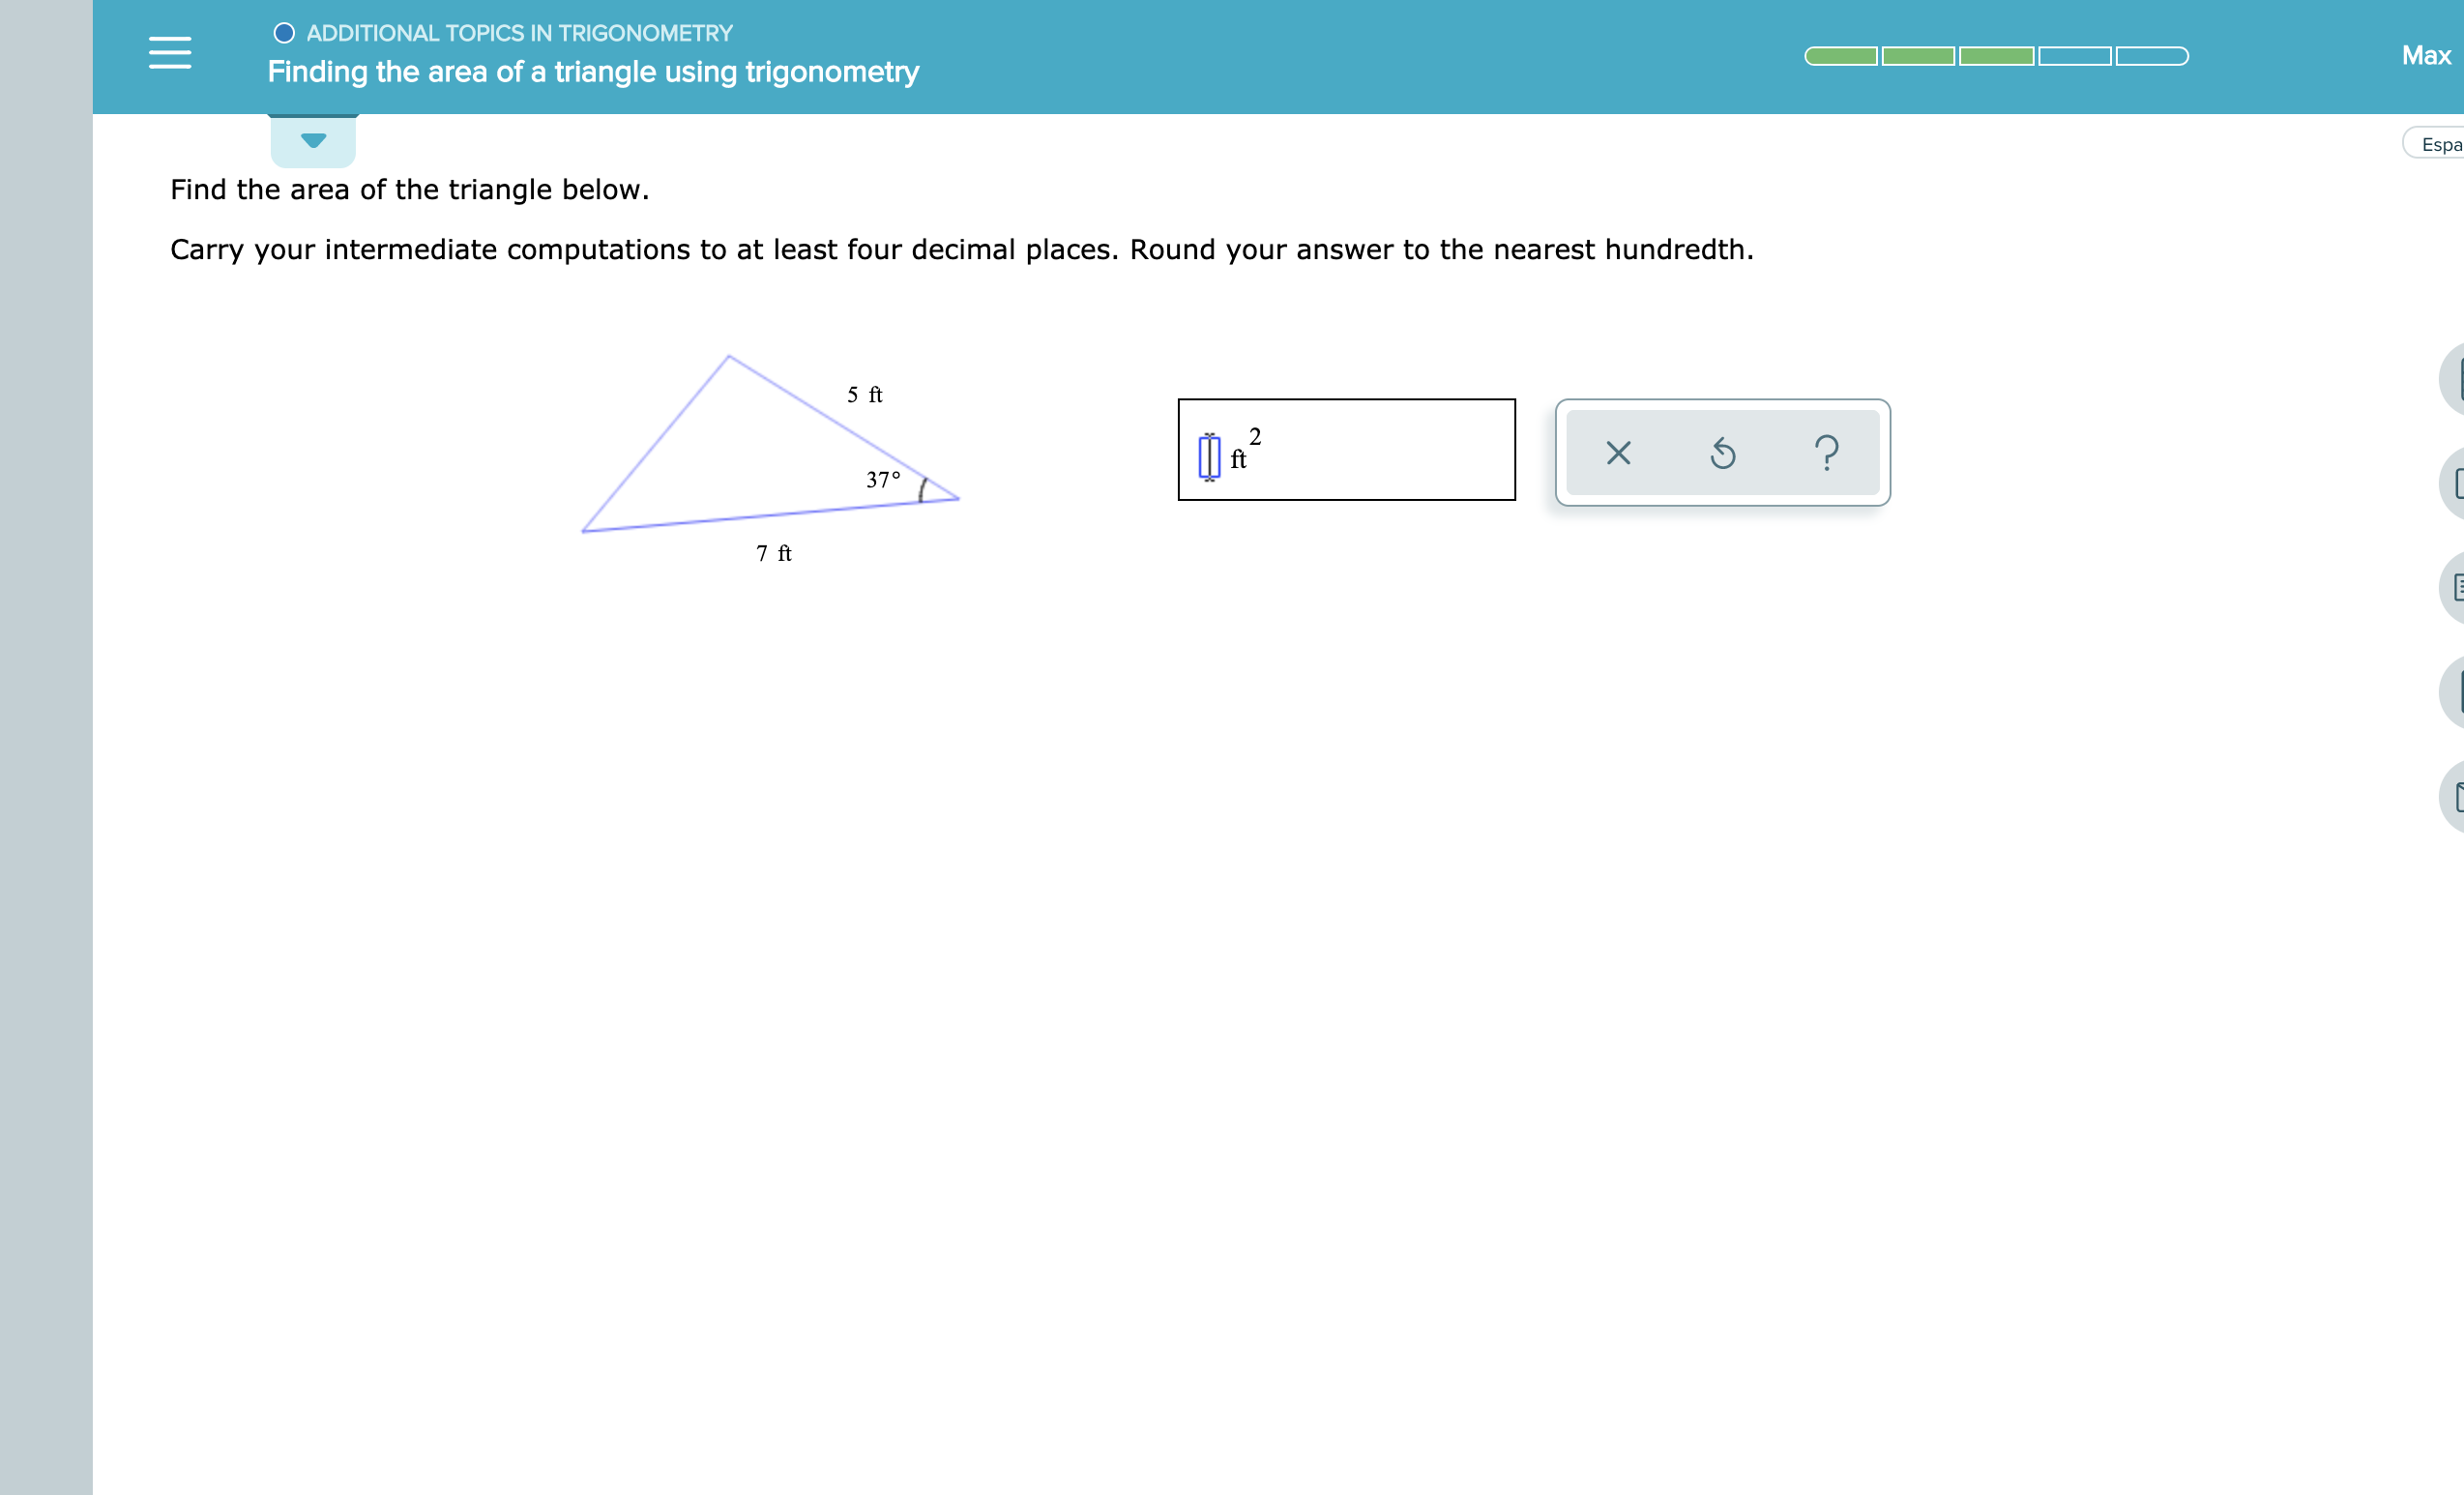 O ADDITIONAL TOPICS IN TRIGONOMETRY
Max
Finding the area of a triangle using trigonometry
Esp
Find the area of the triangle below.
Carry your intermediate computations to at least four decimal places. Round your answer to the nearest hundredth
5 ft
2
ft
37°
7 ft
